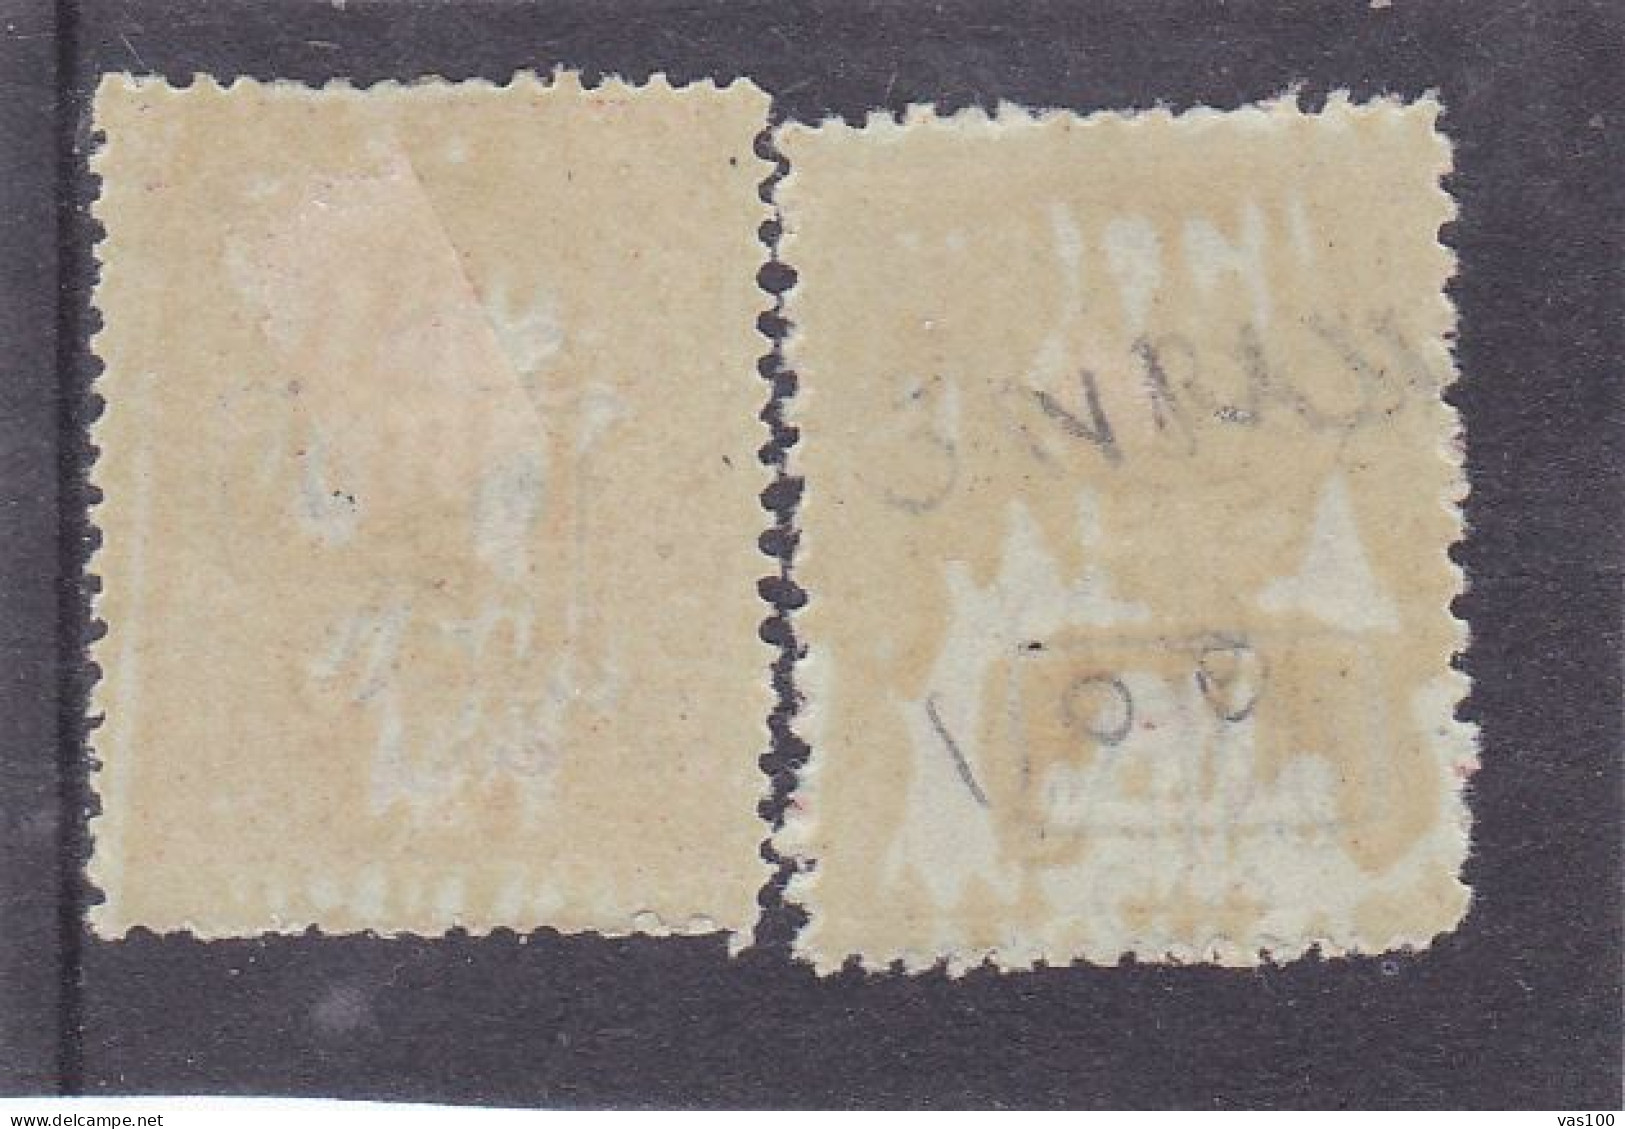 Germany WW1 Occupation In Romania 1917 MViR 10 BANI 2 STAMPS POSTAGE DUE MINT - Besetzungen